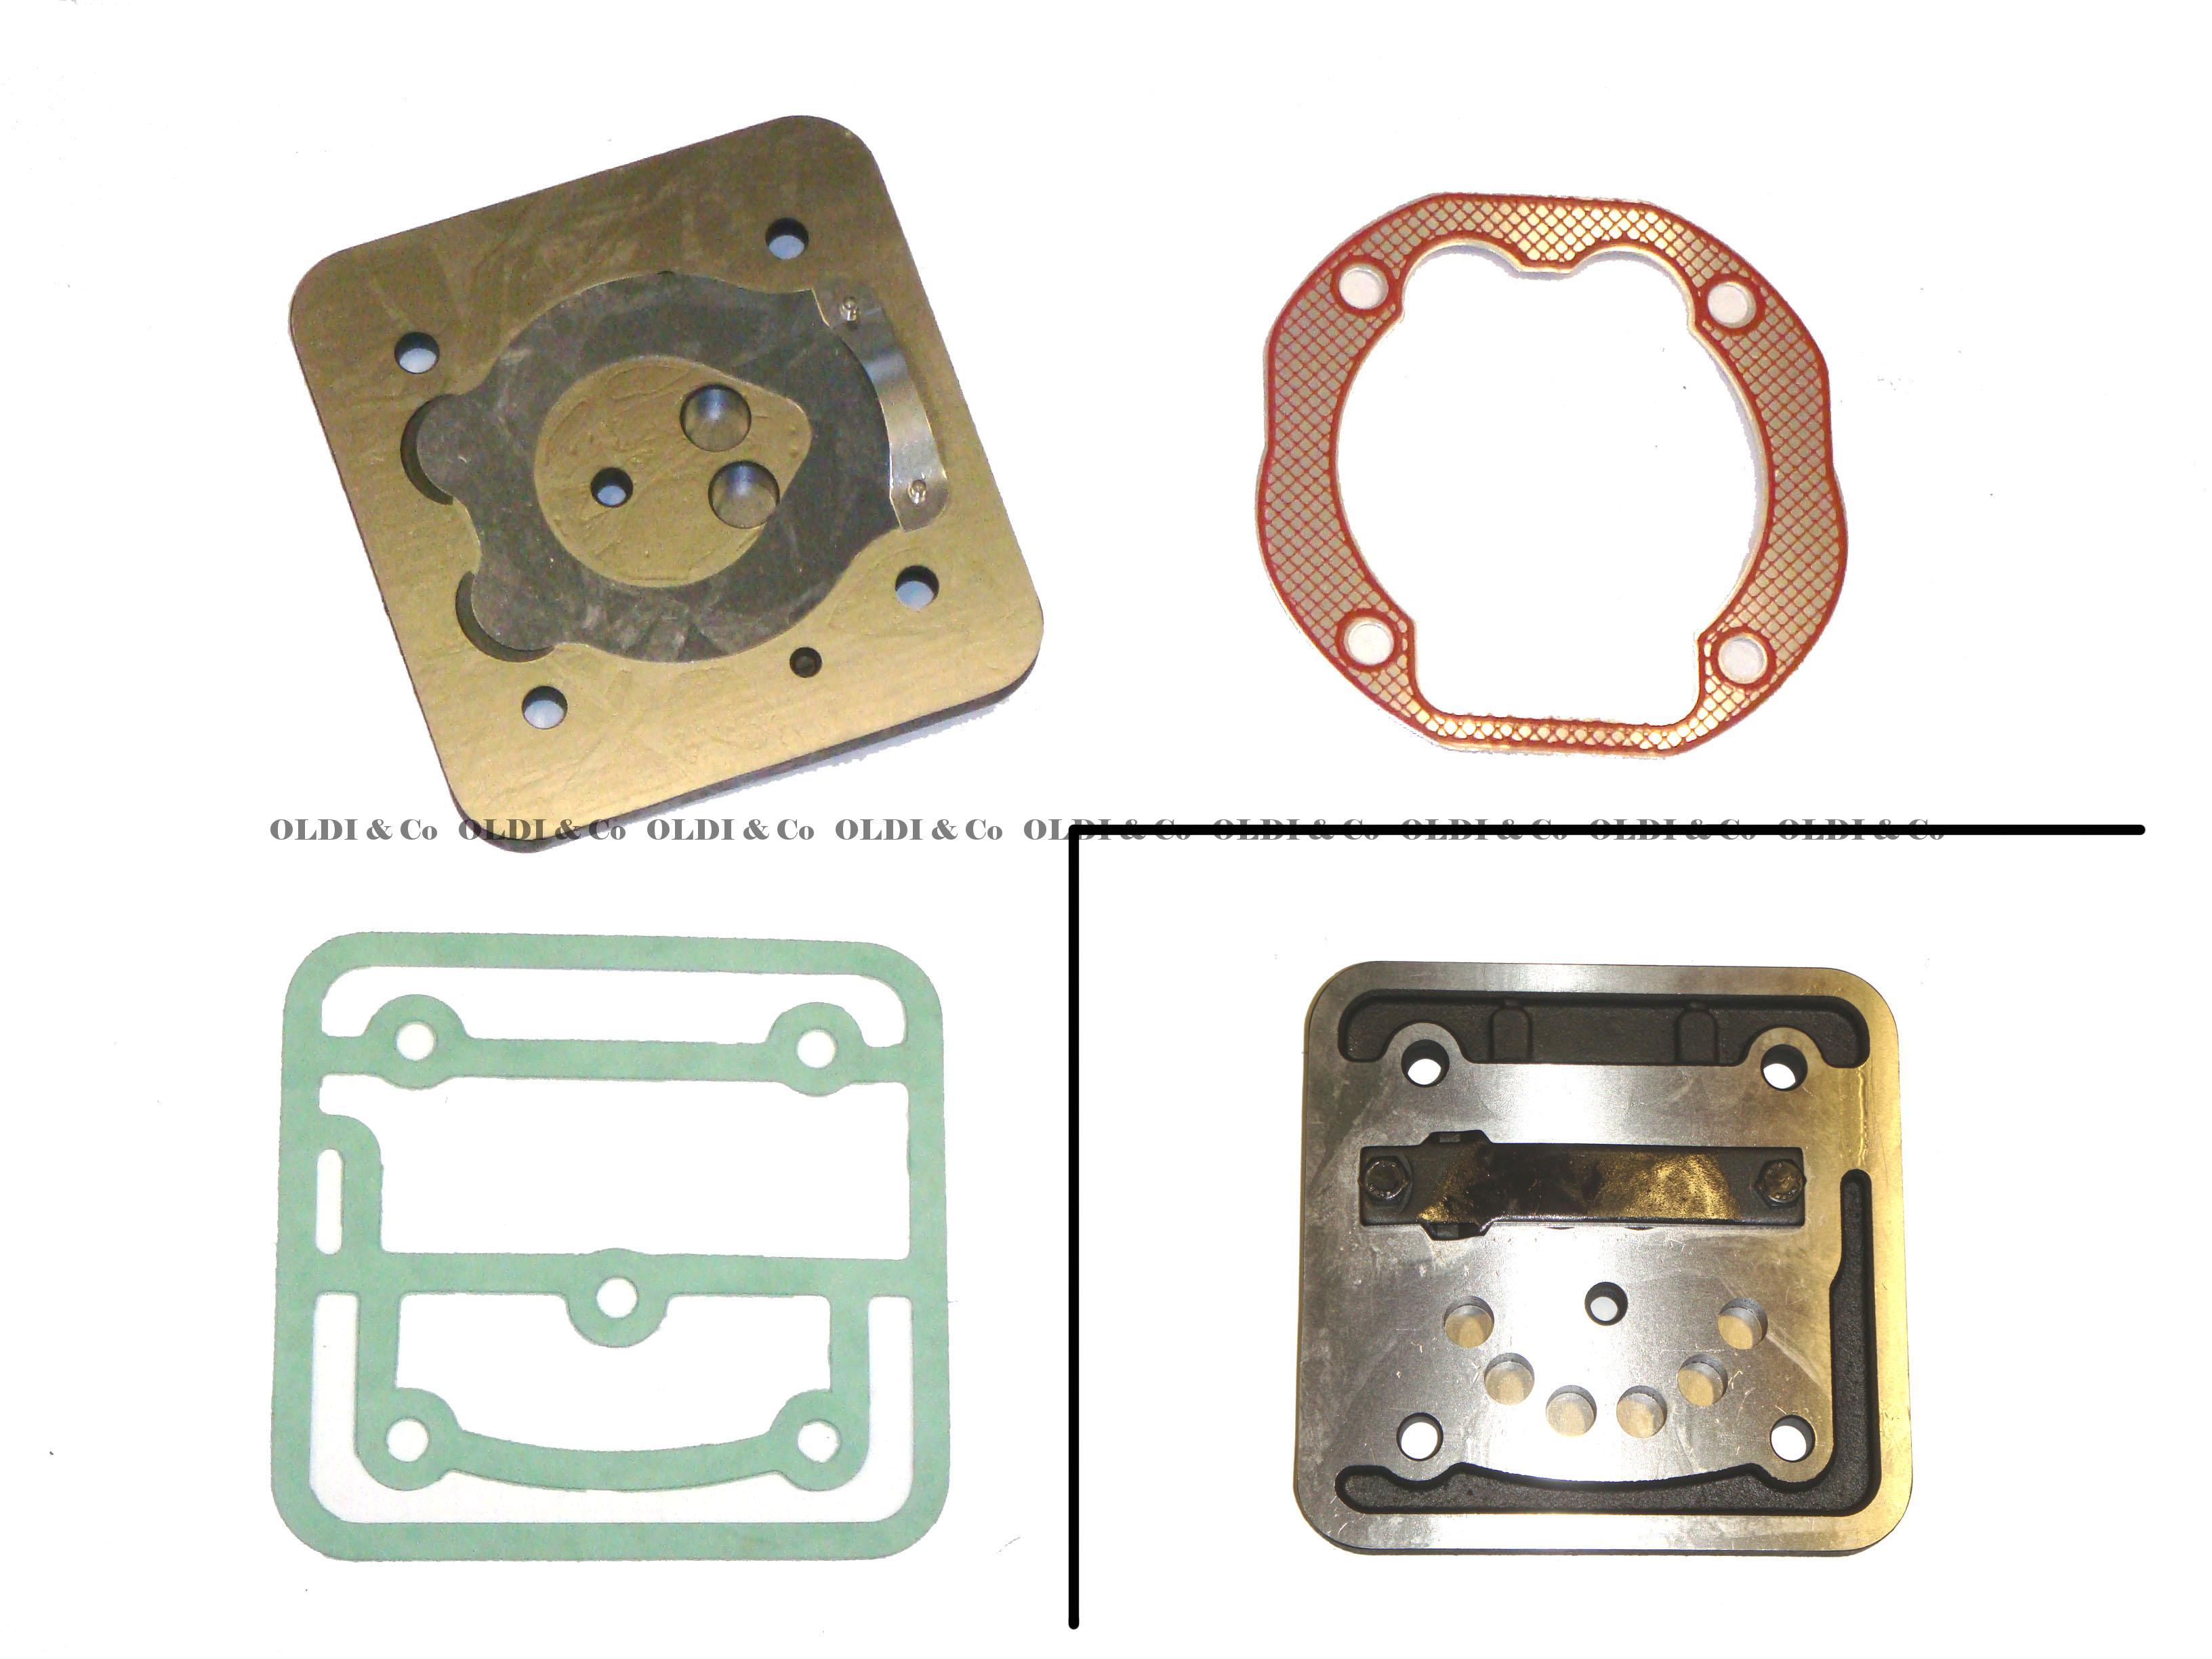 37.006.05524 Compressors and their components → Compressor valve plate